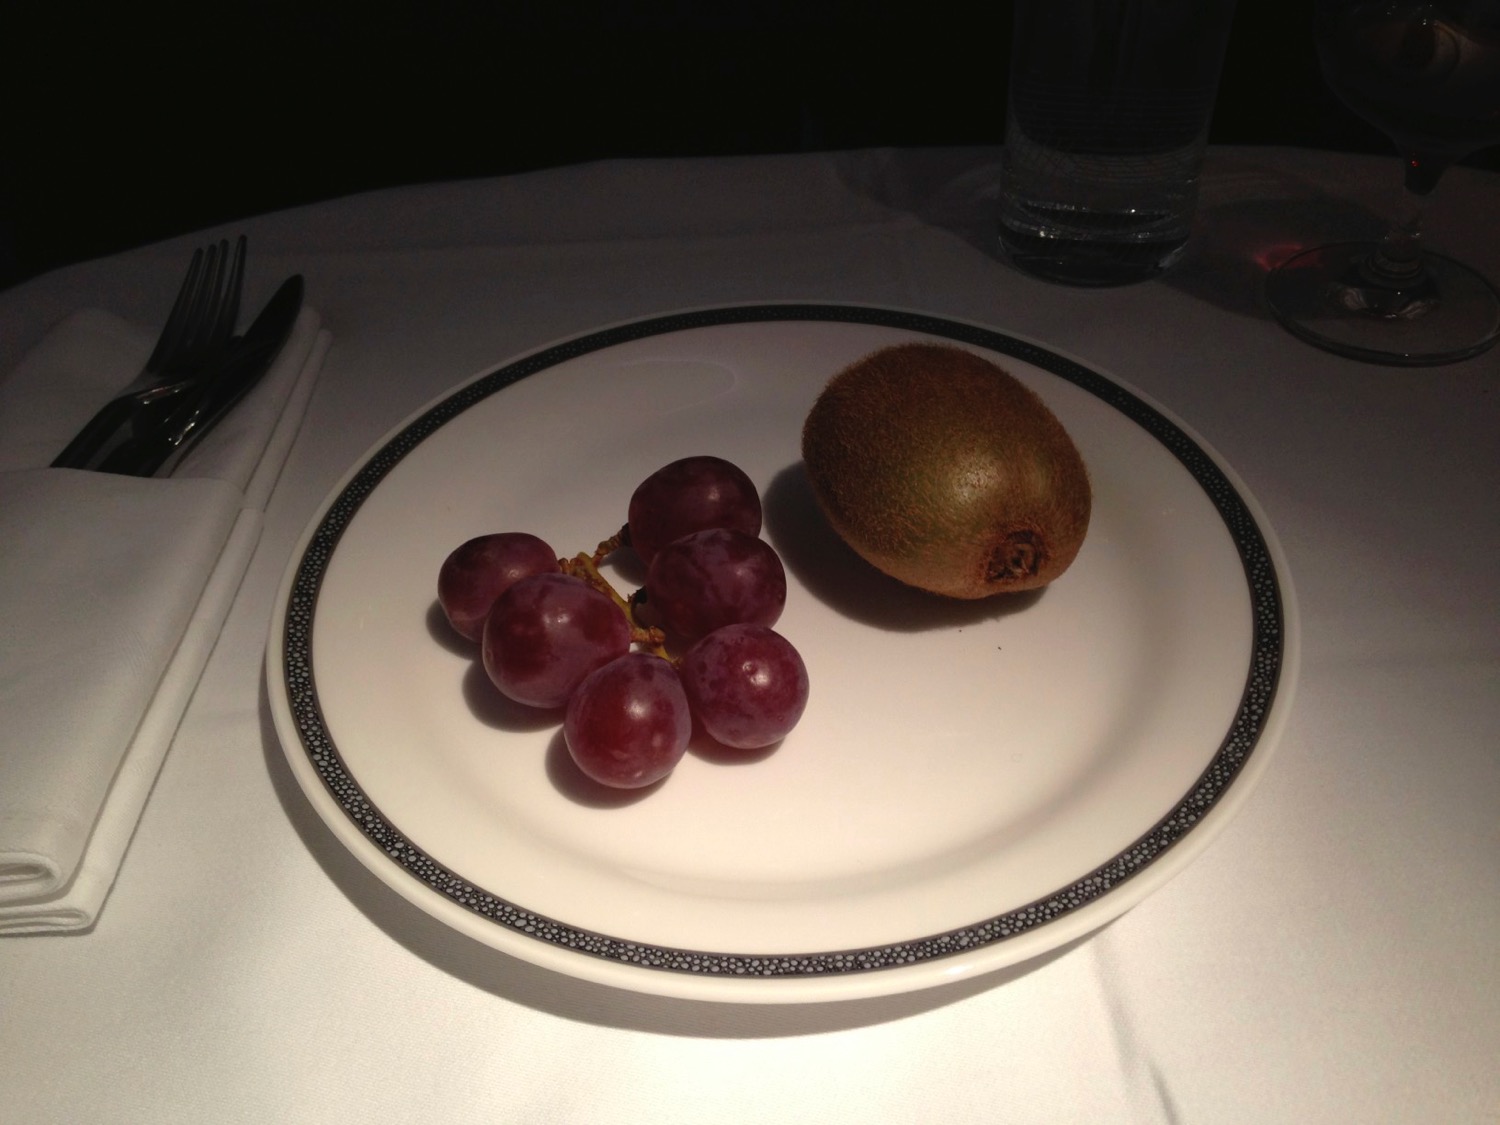 a plate with grapes and a kiwi on it